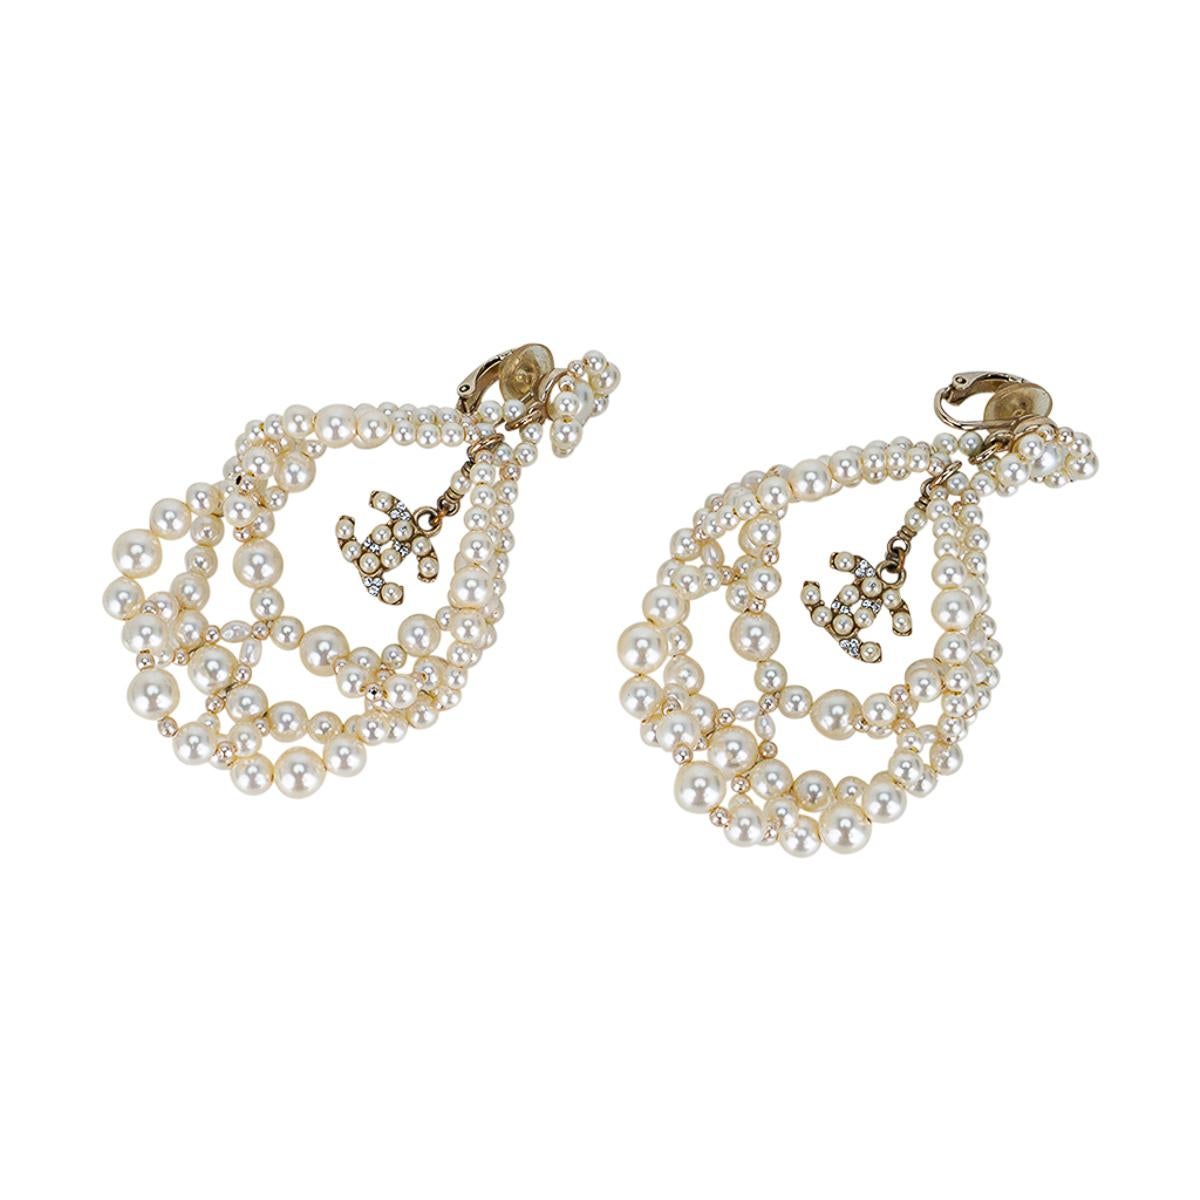 Chanel Limited Edition Pearl Earrings 15A In Excellent Condition For Sale In Miami, FL